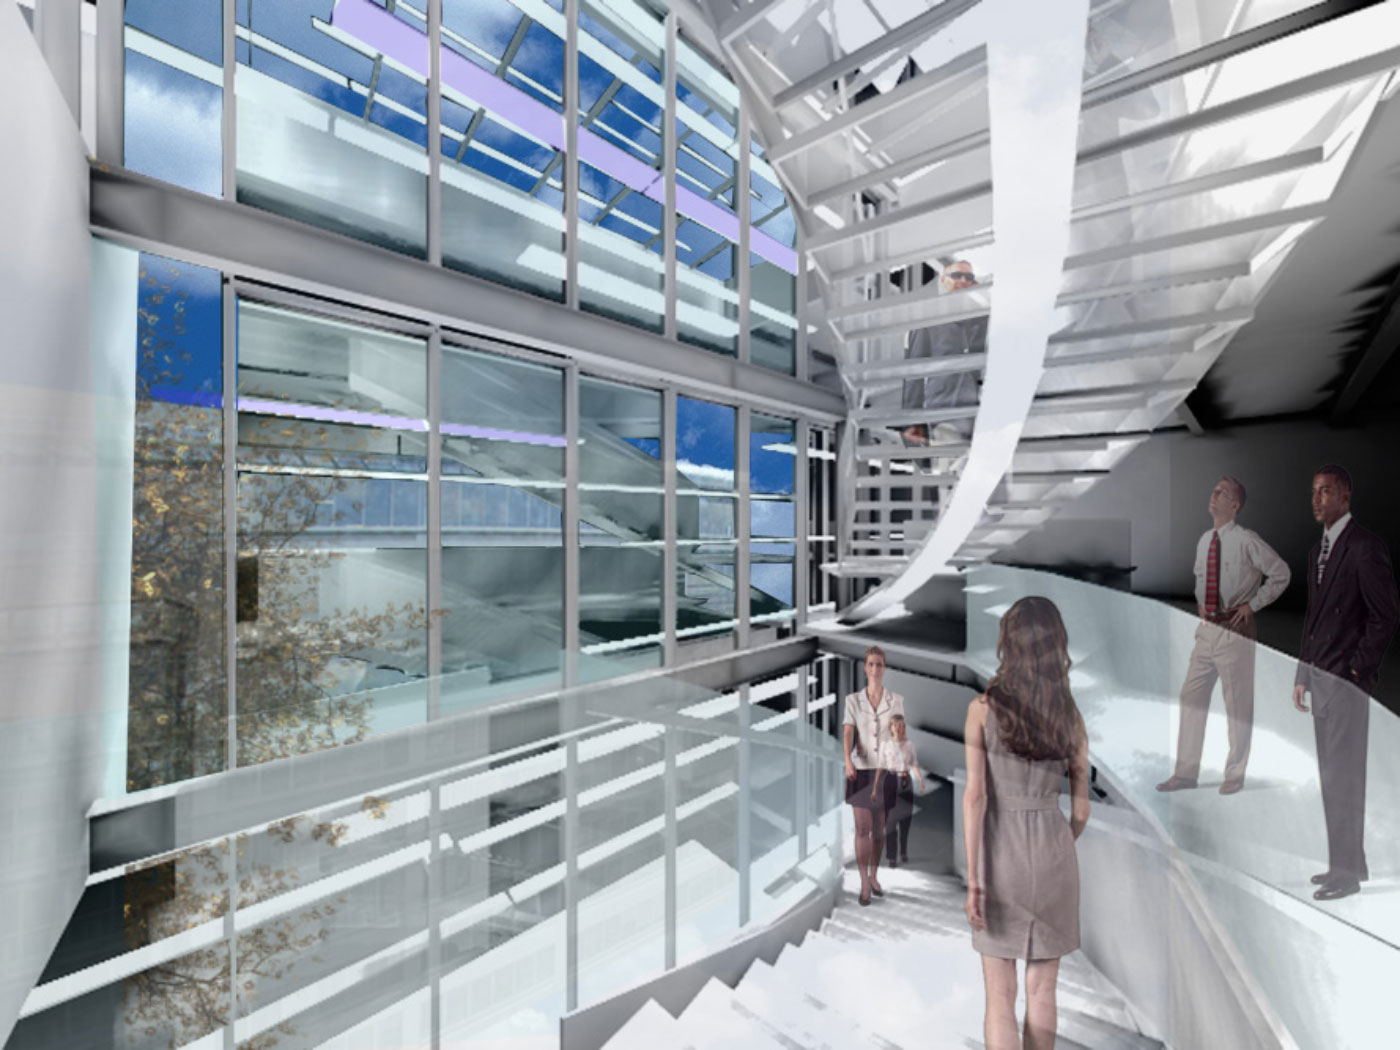 Interior Perspective for The Ocean Conservancy in DC by Virginia Architect shows Stair and Colorful Glass Windows Overlooking K Street.